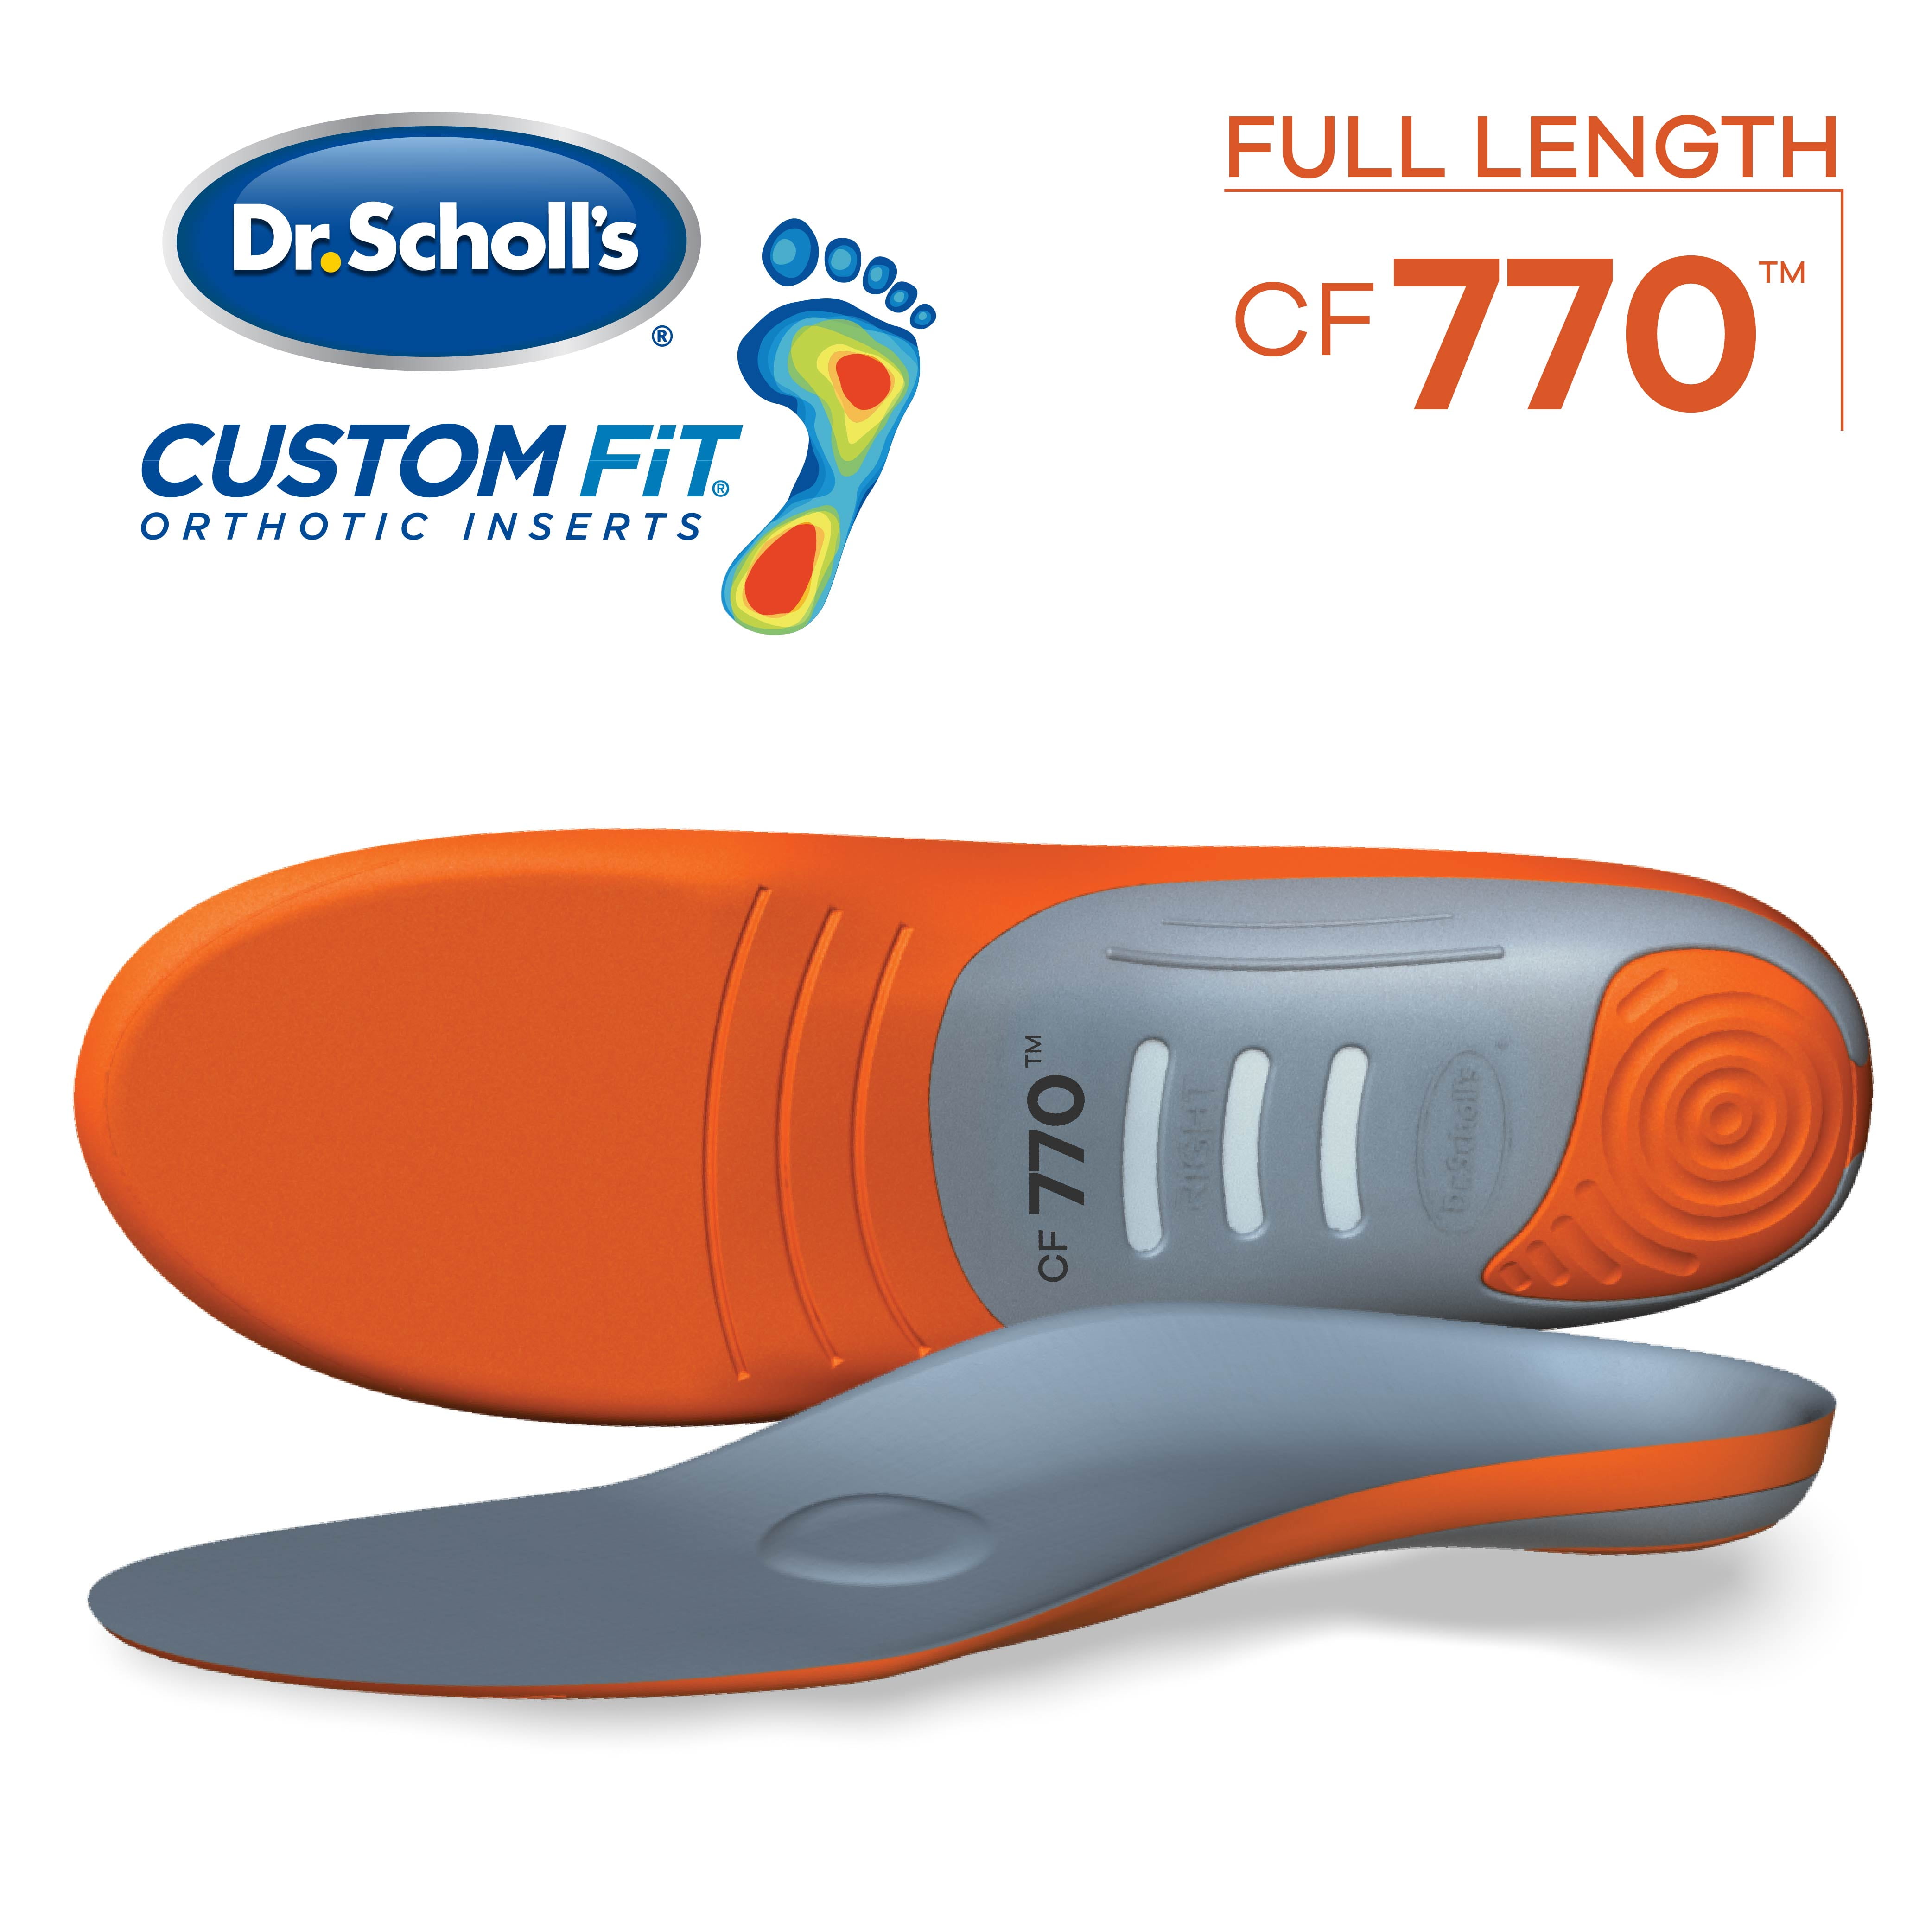 Dr. Scholl's Custom Fit 770 Orthotics Full Length Inserts for Foot Knee & Low Back Pain Relief, 1 pr